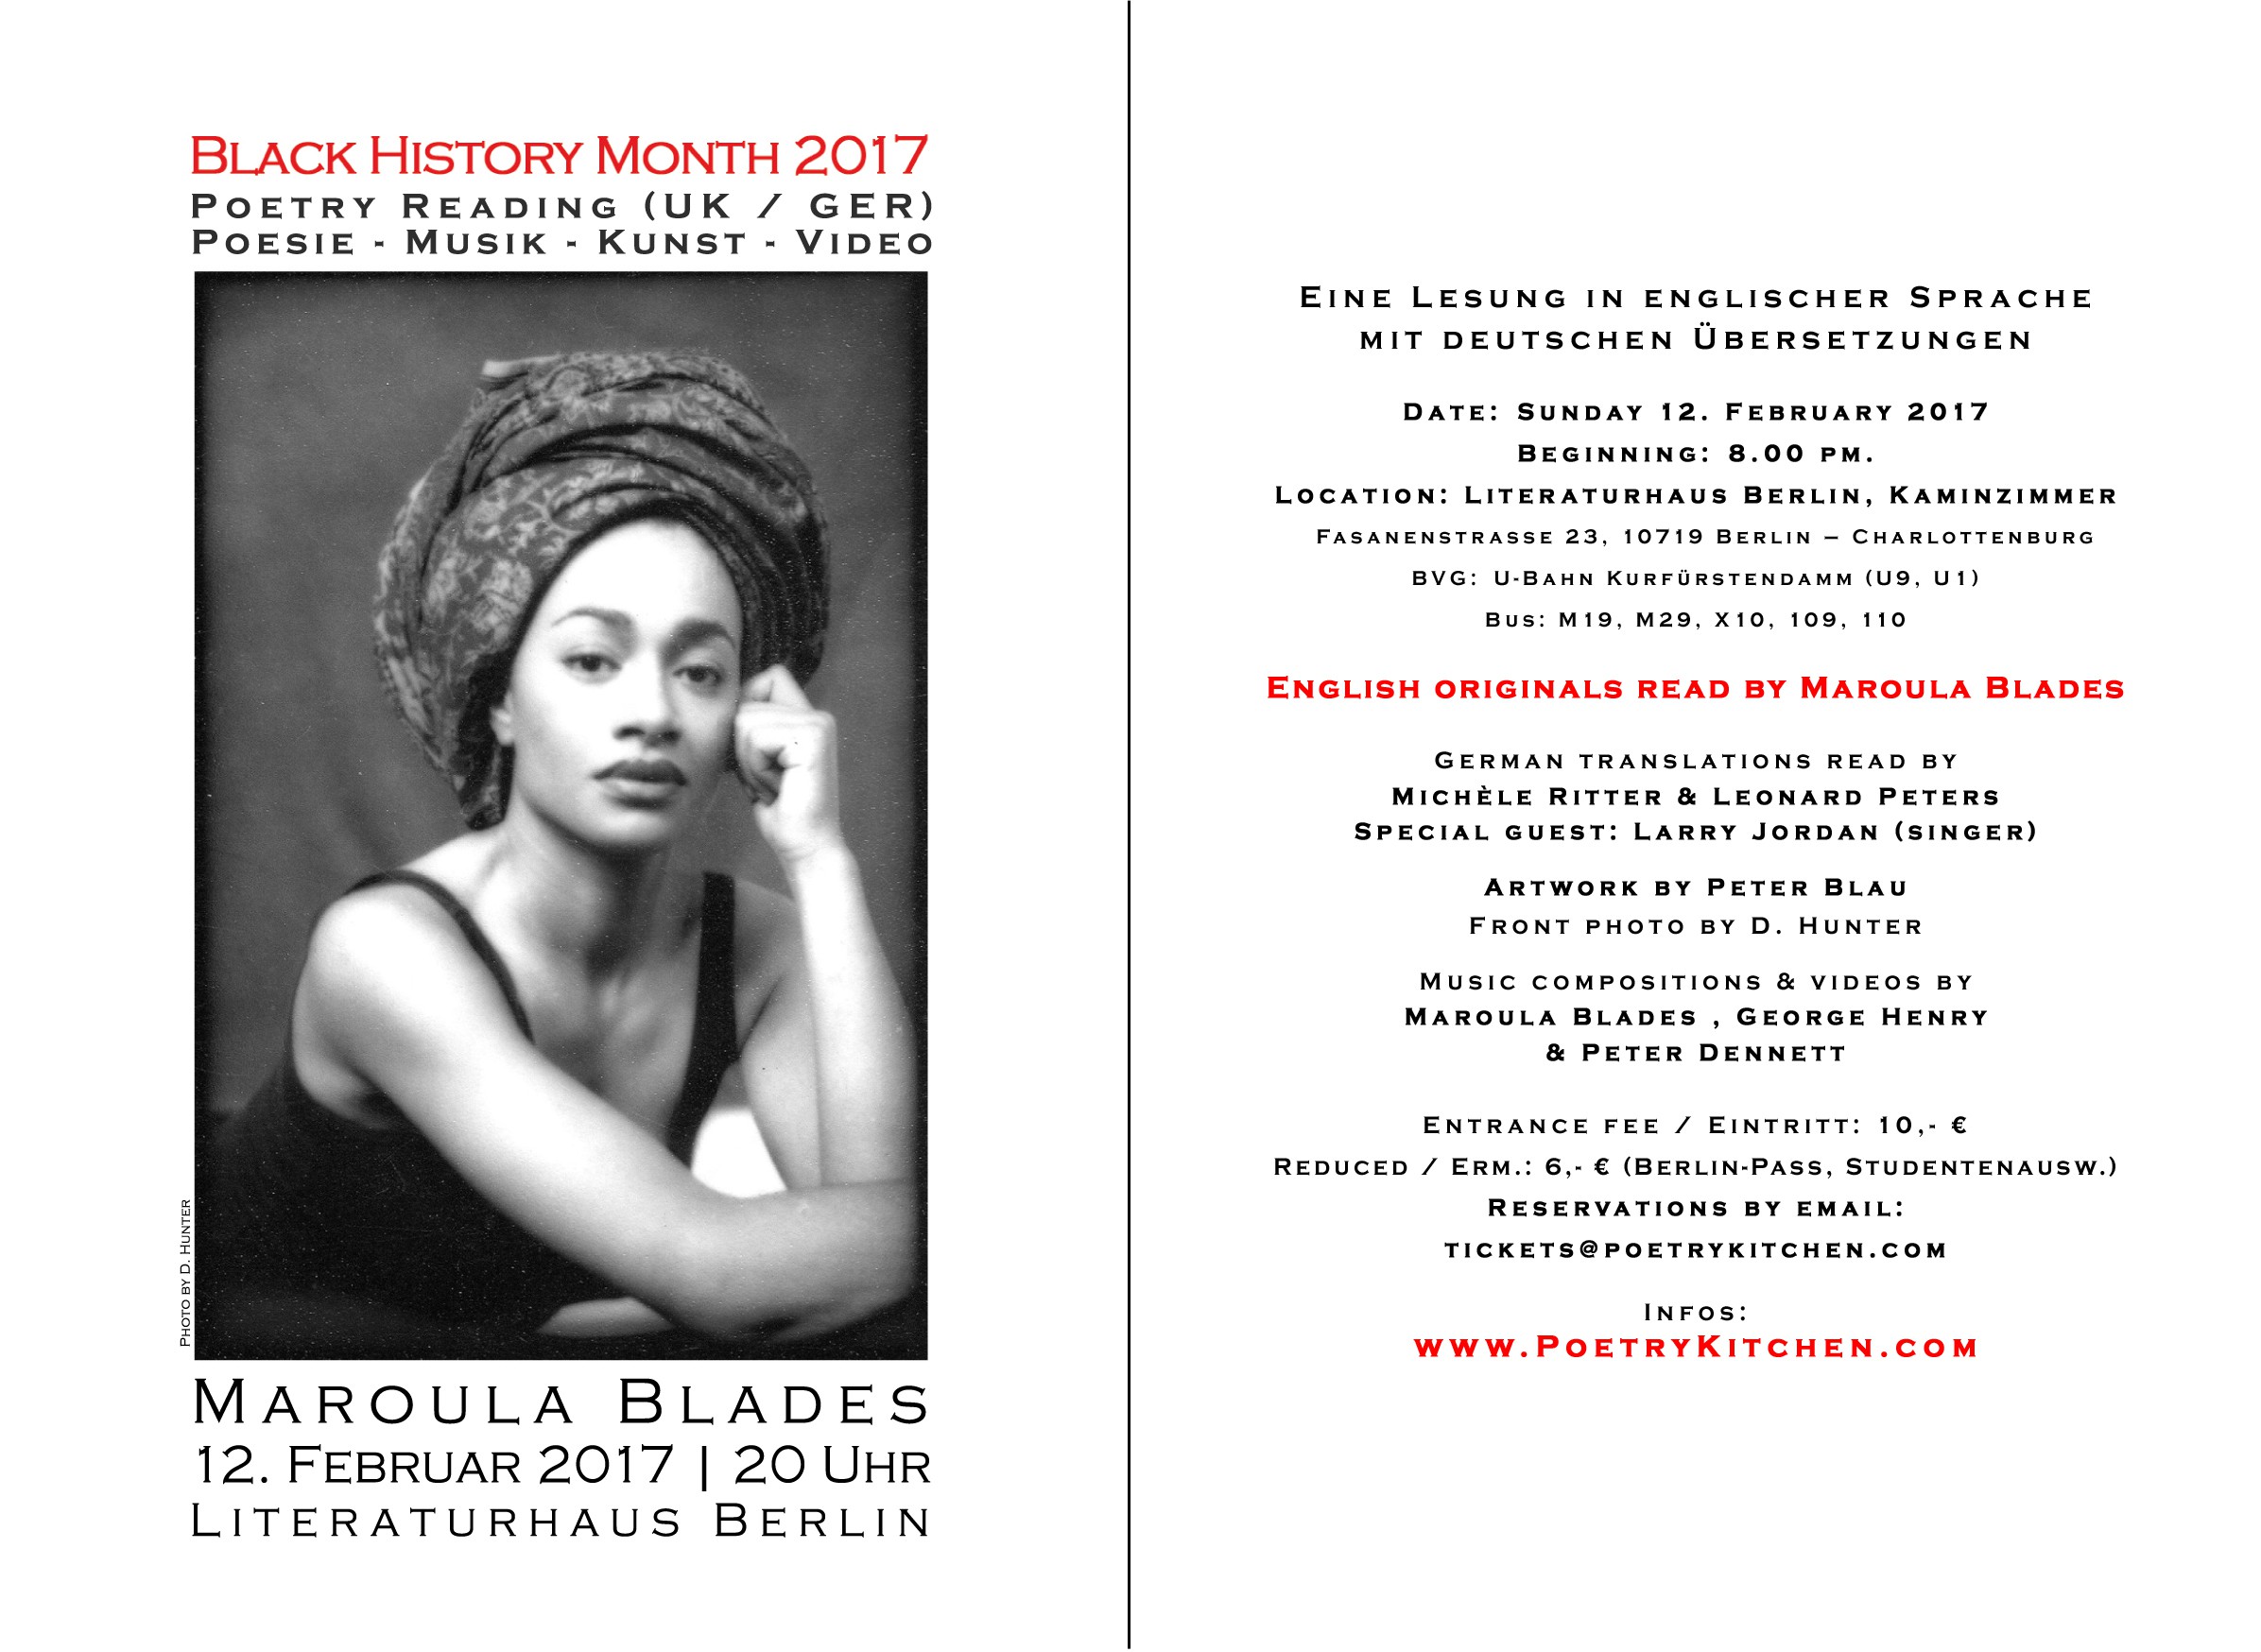 email flyer - Maroula Blades - Black History Month 2017